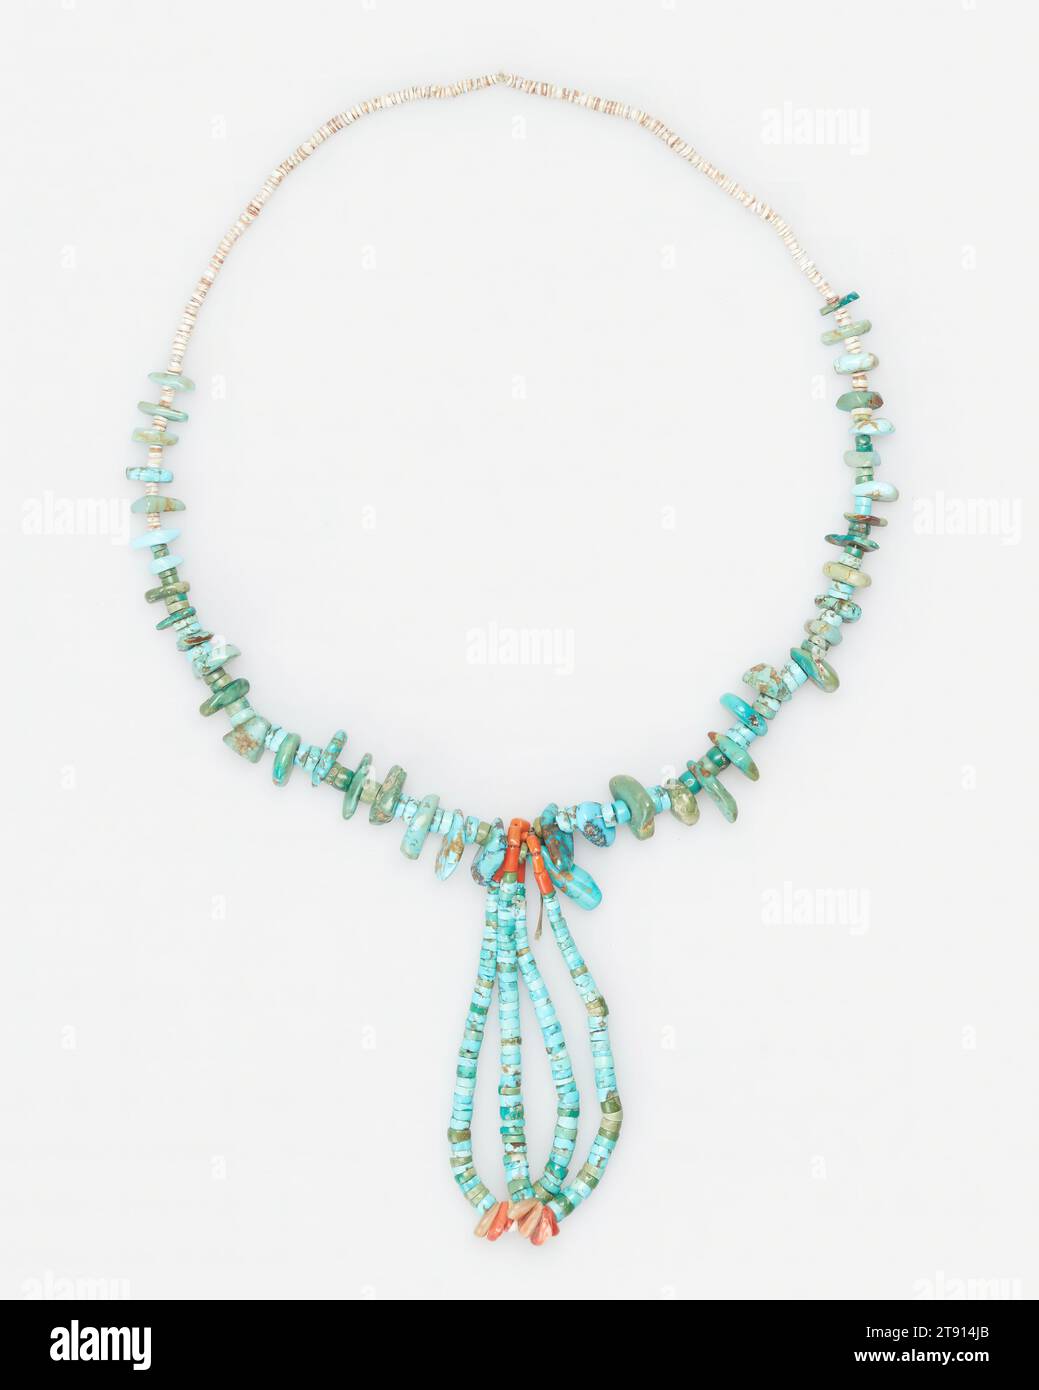 Necklace, 20th century, 12 3/4 in. (32.4 cm), Heishi, turquoise, shell, United States, 20th century Stock Photo